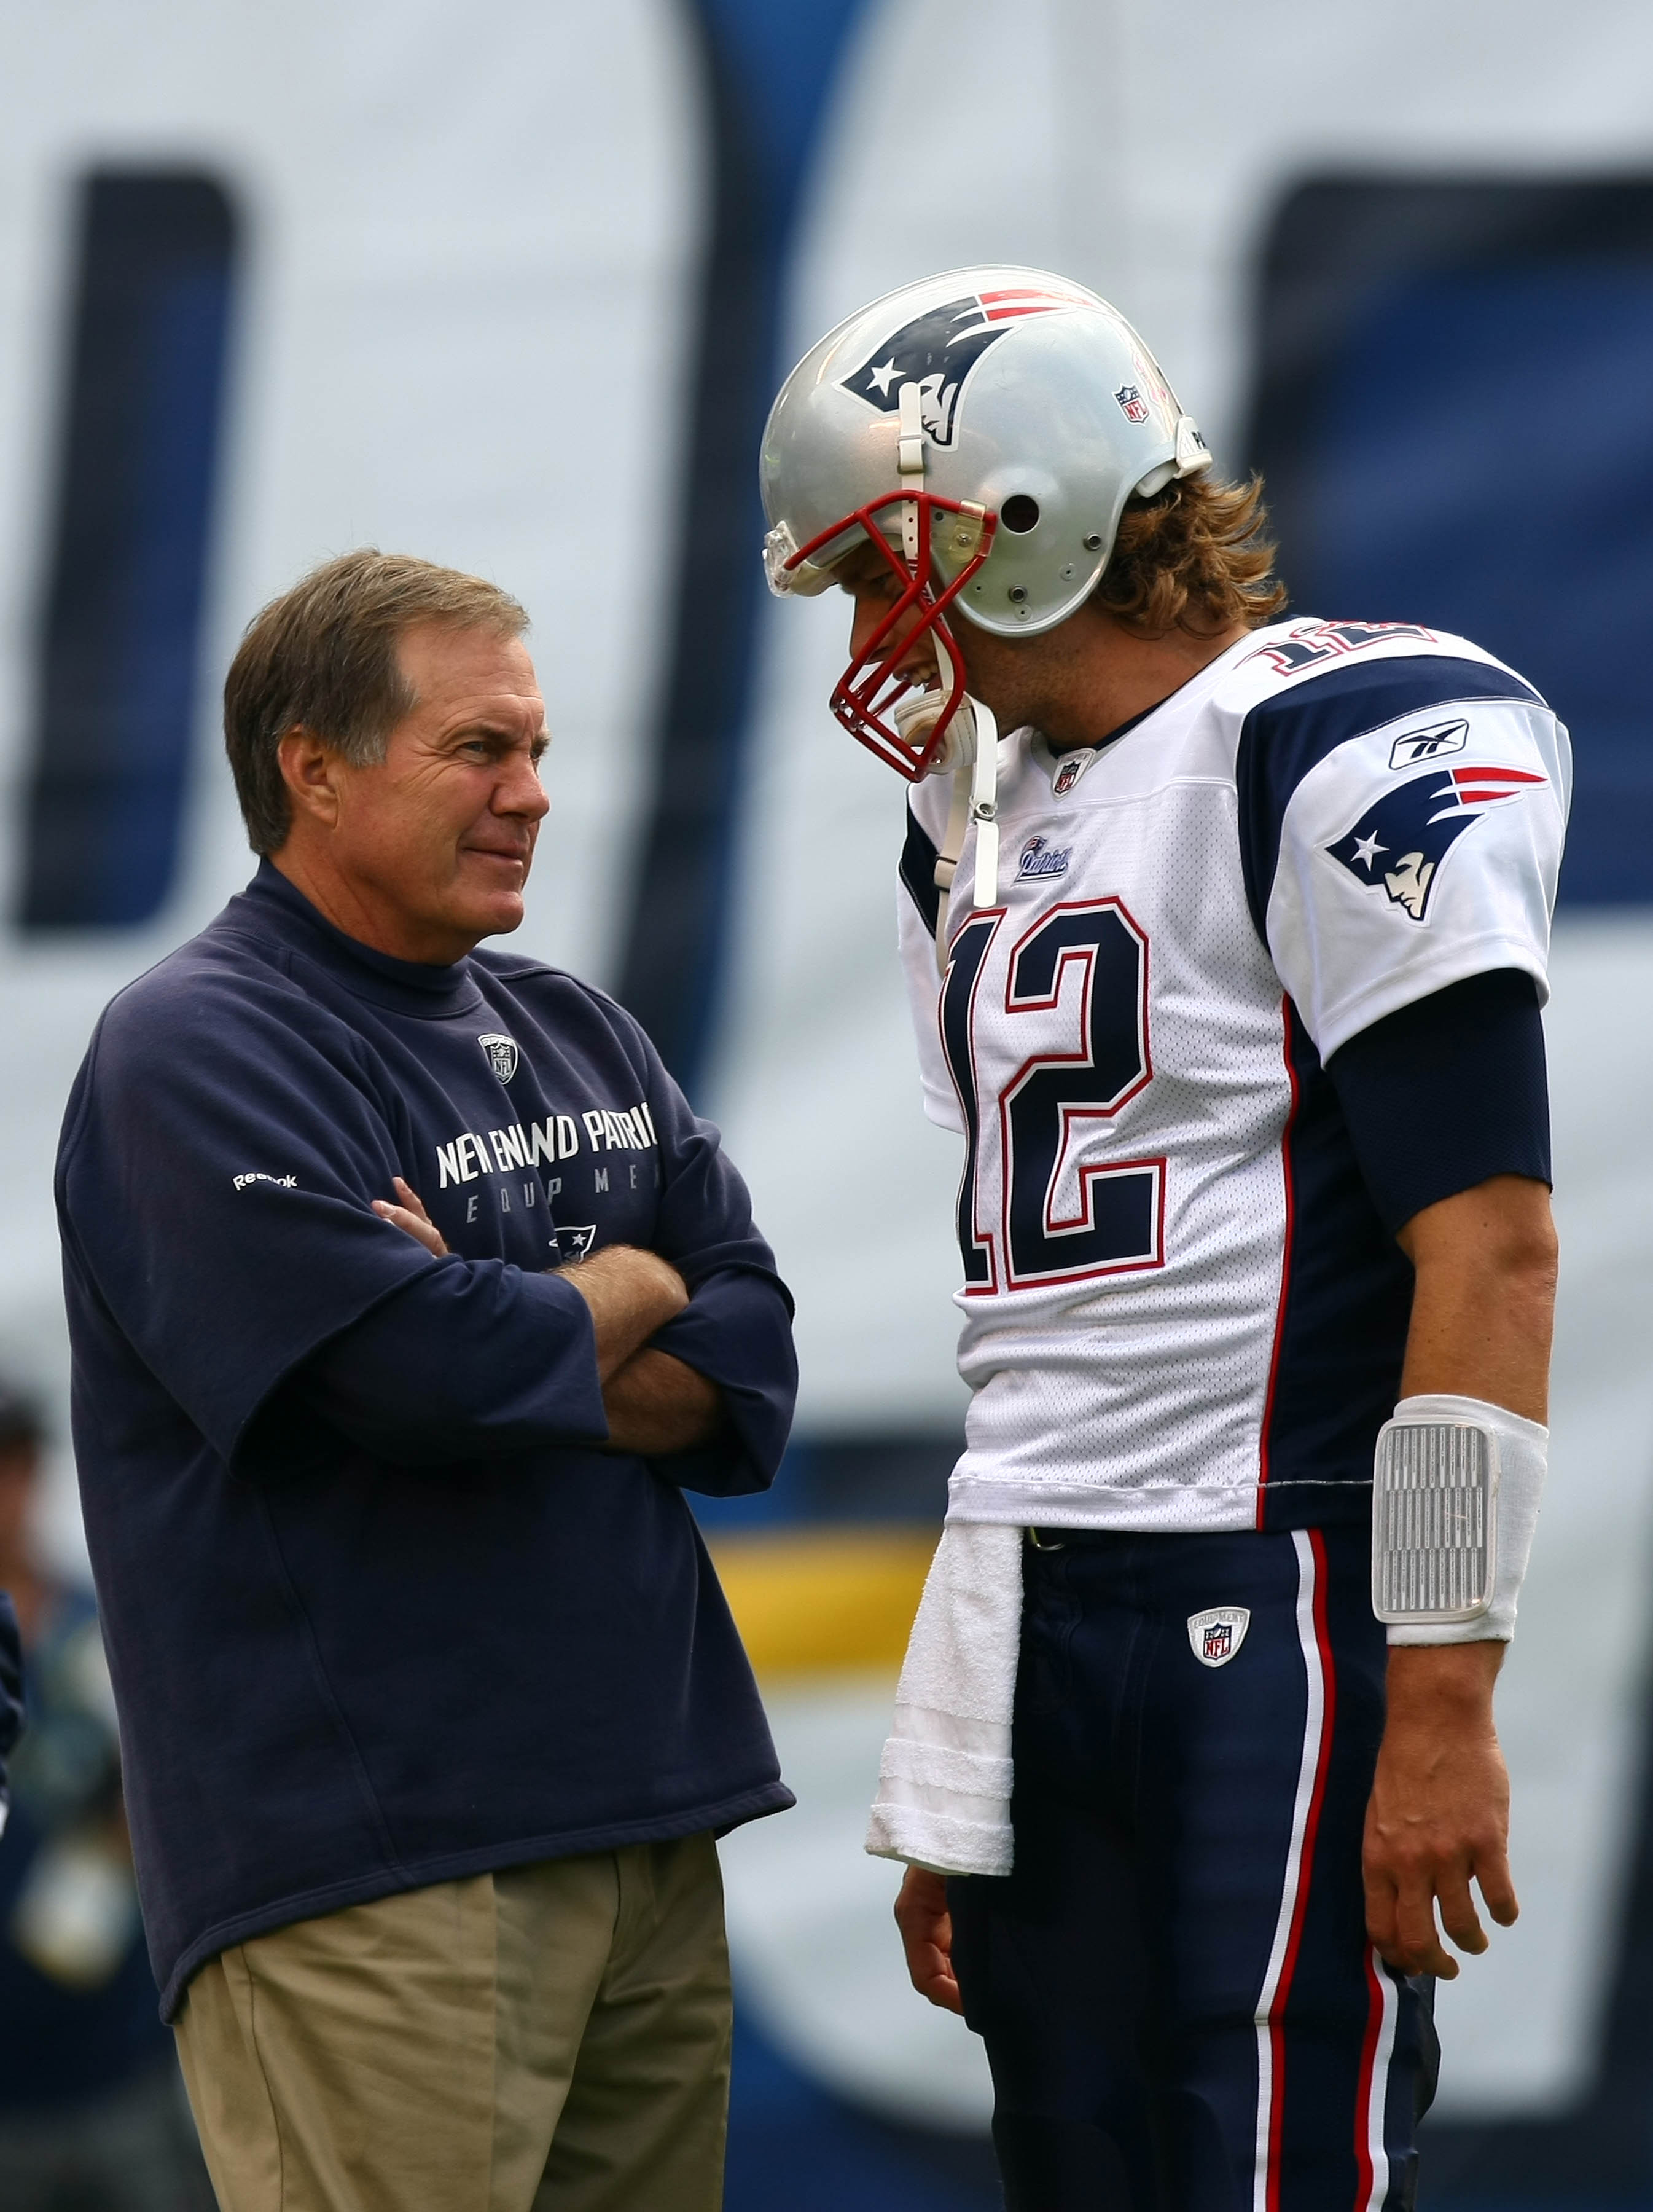 SAN DIEGO - OCTOBER 24:  Quarterback Tom Brady #12 of the New England speak to Head Coach Bill Belichick against the San Diego Chargers during their NFL game on October 24, 2010 at Qualcomm Stadium in San Diego, California. (Photo by Donald Miralle/Getty